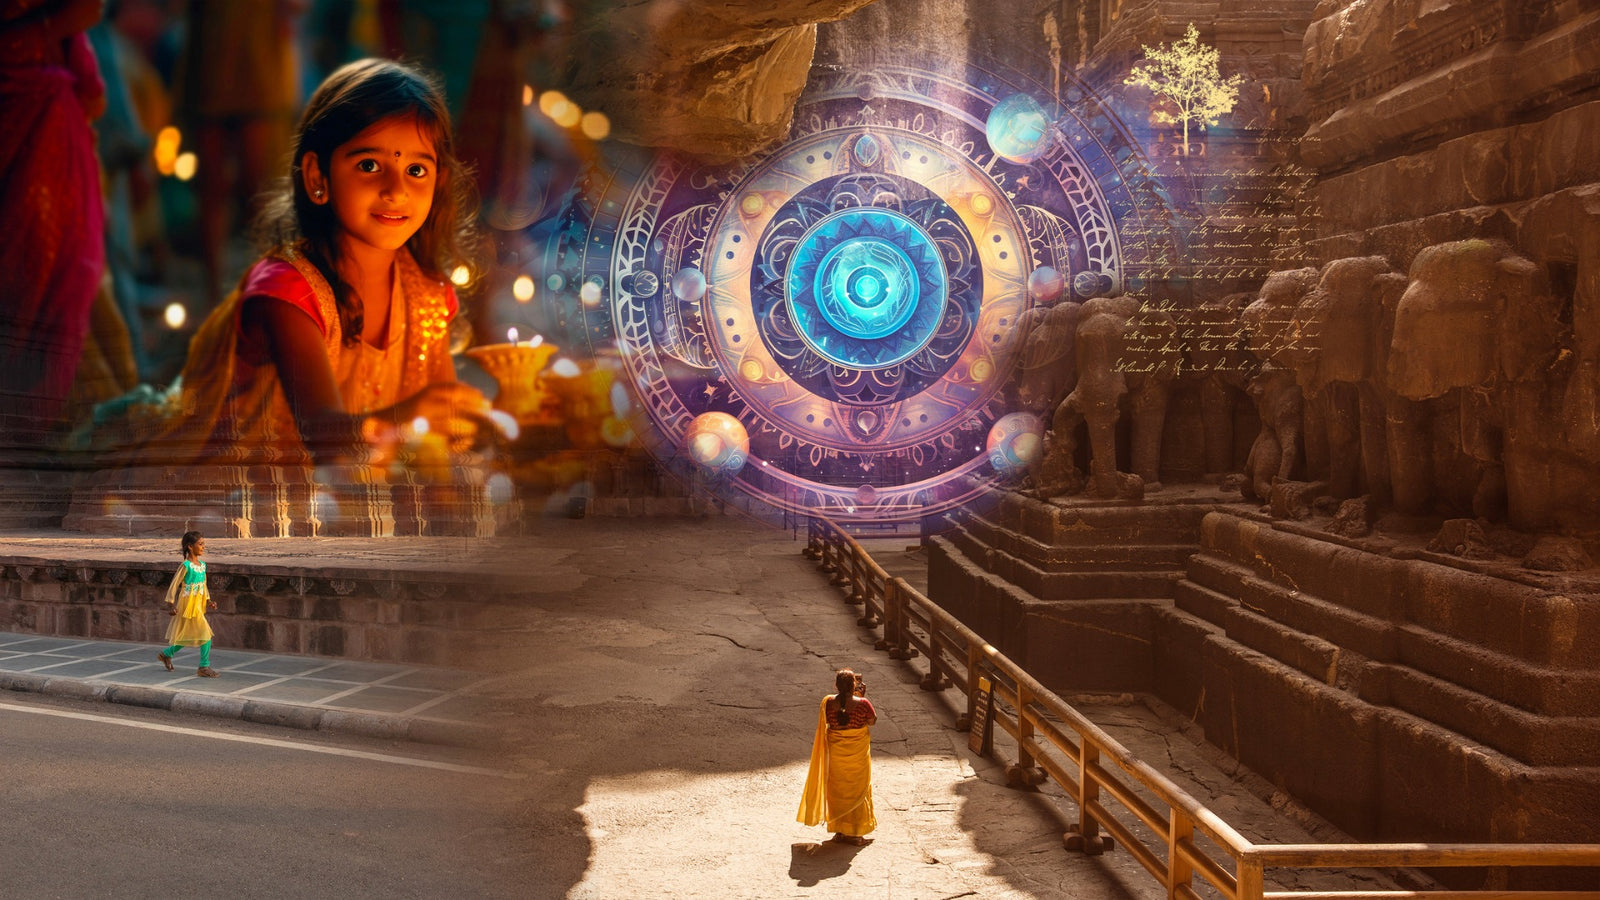 'When past becomes Alive & Meaningful'- Symbolism in Indian Spirituality